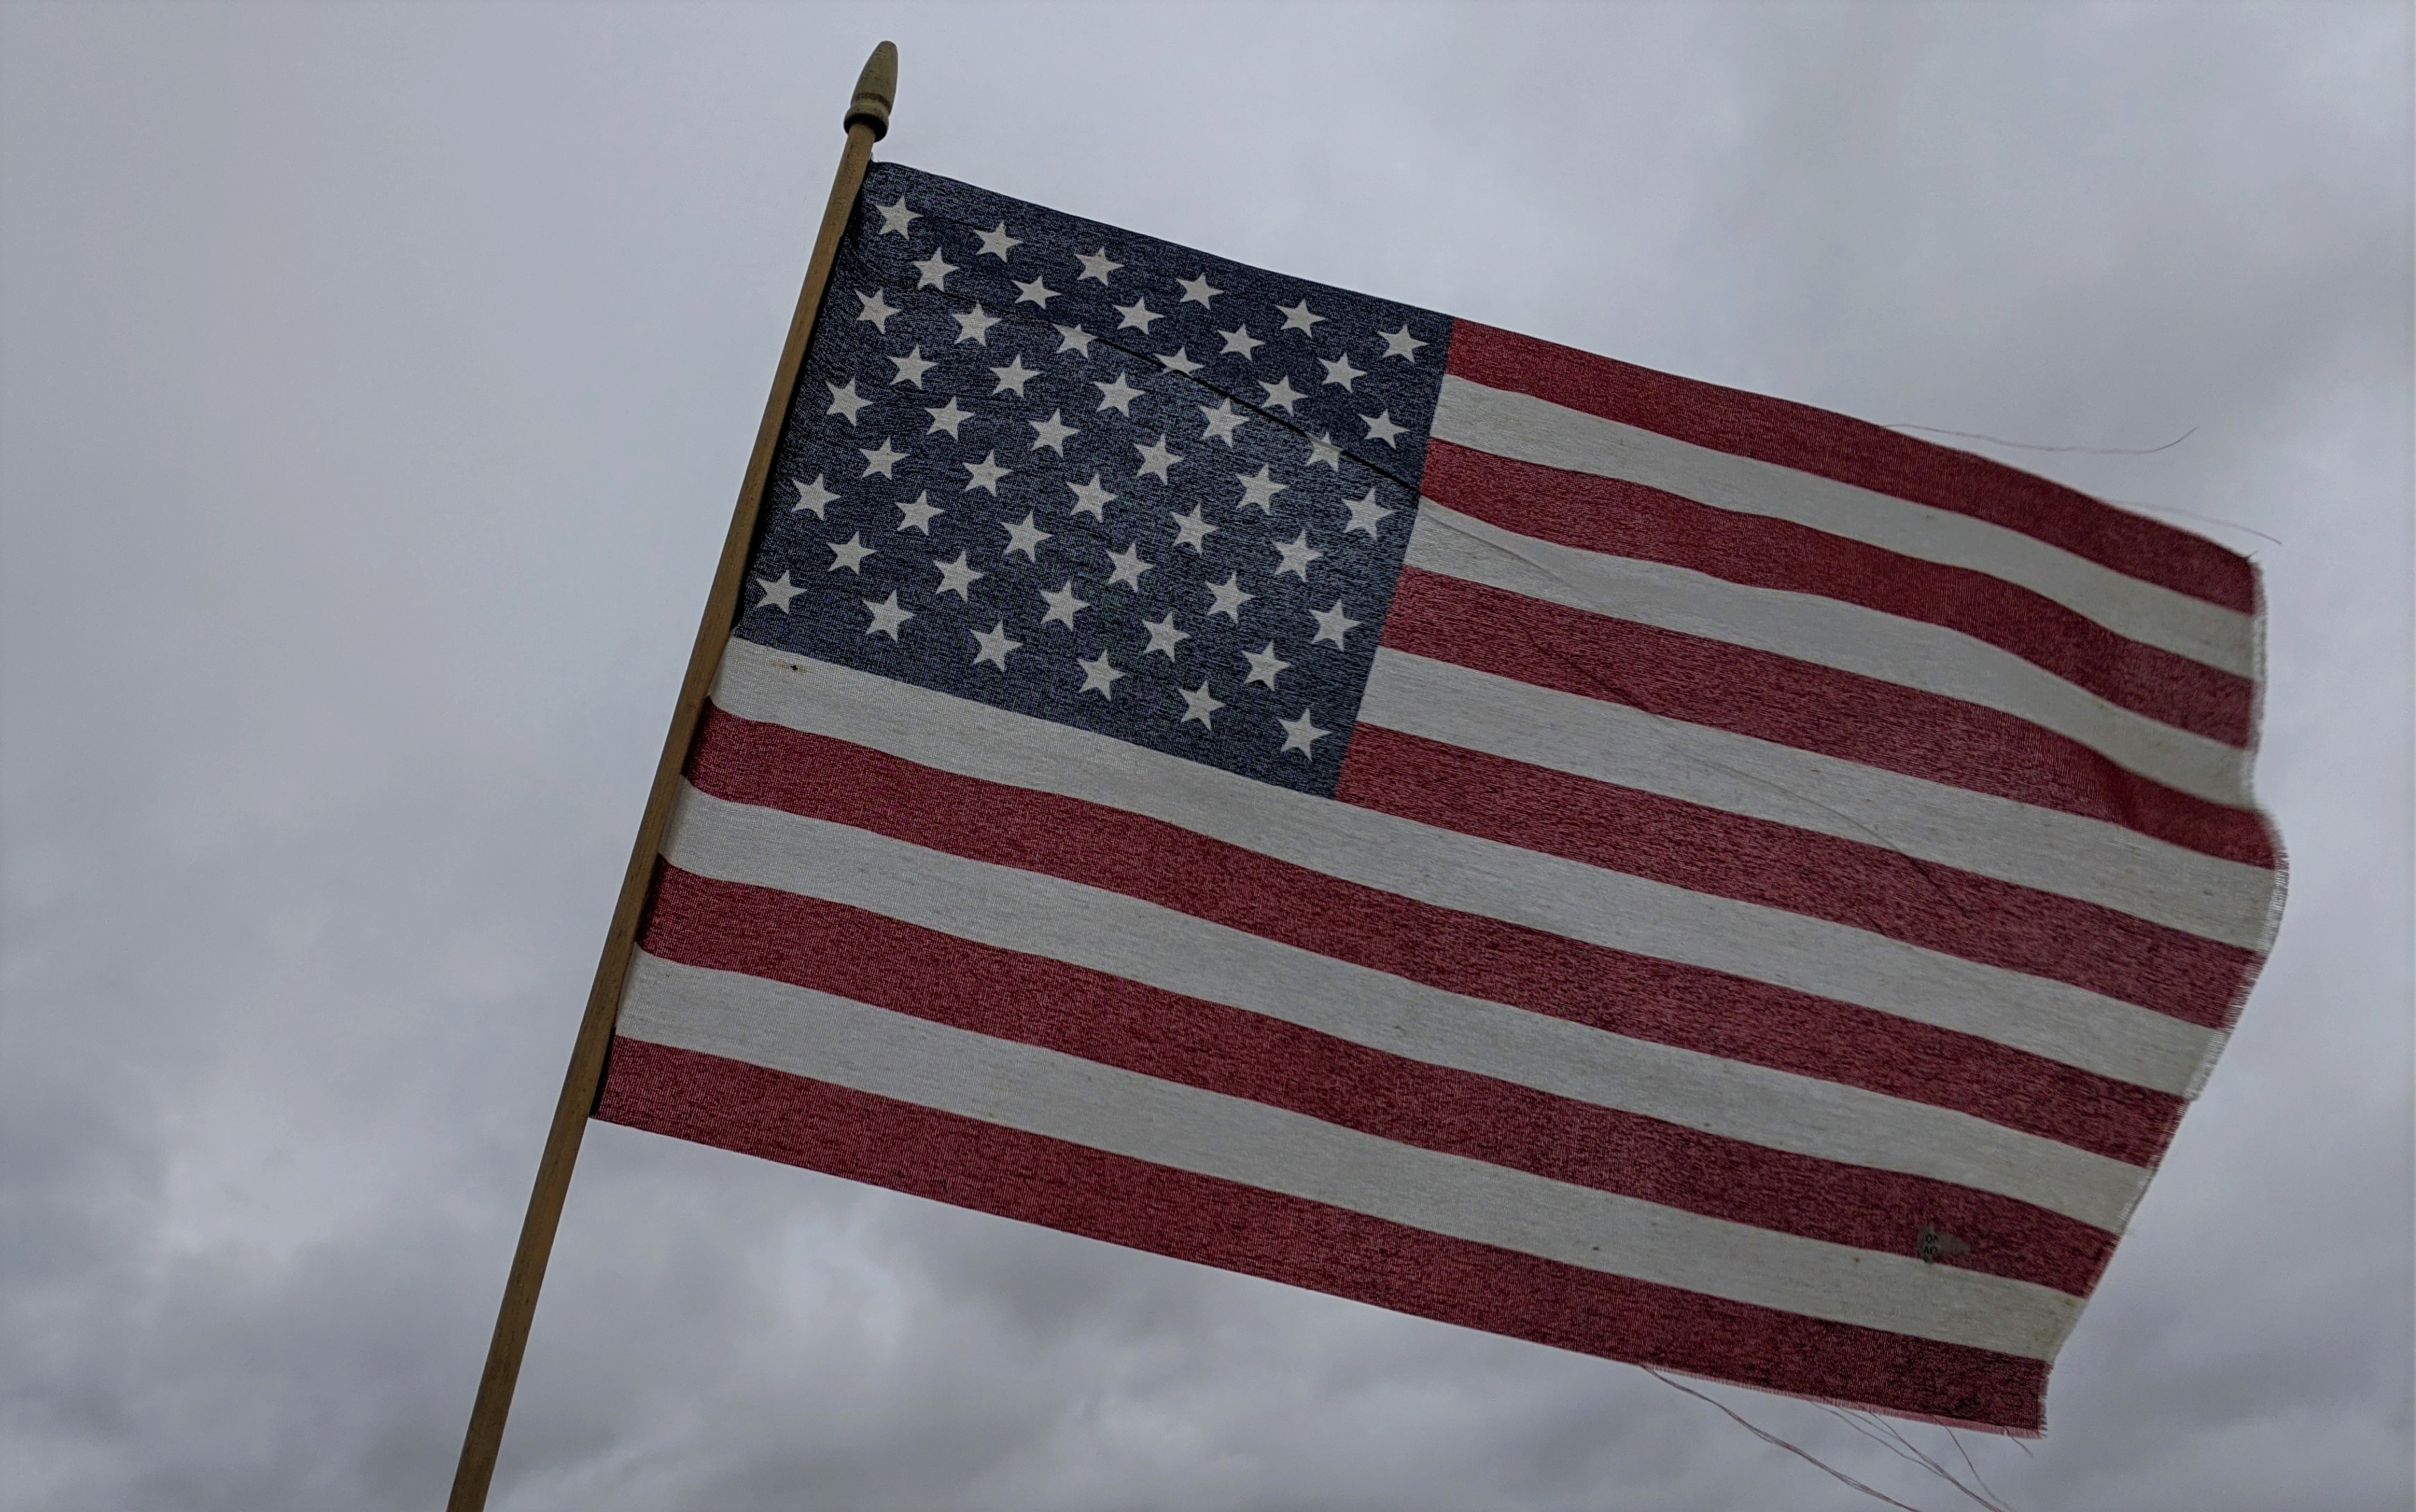 A United States flag weathers the storm